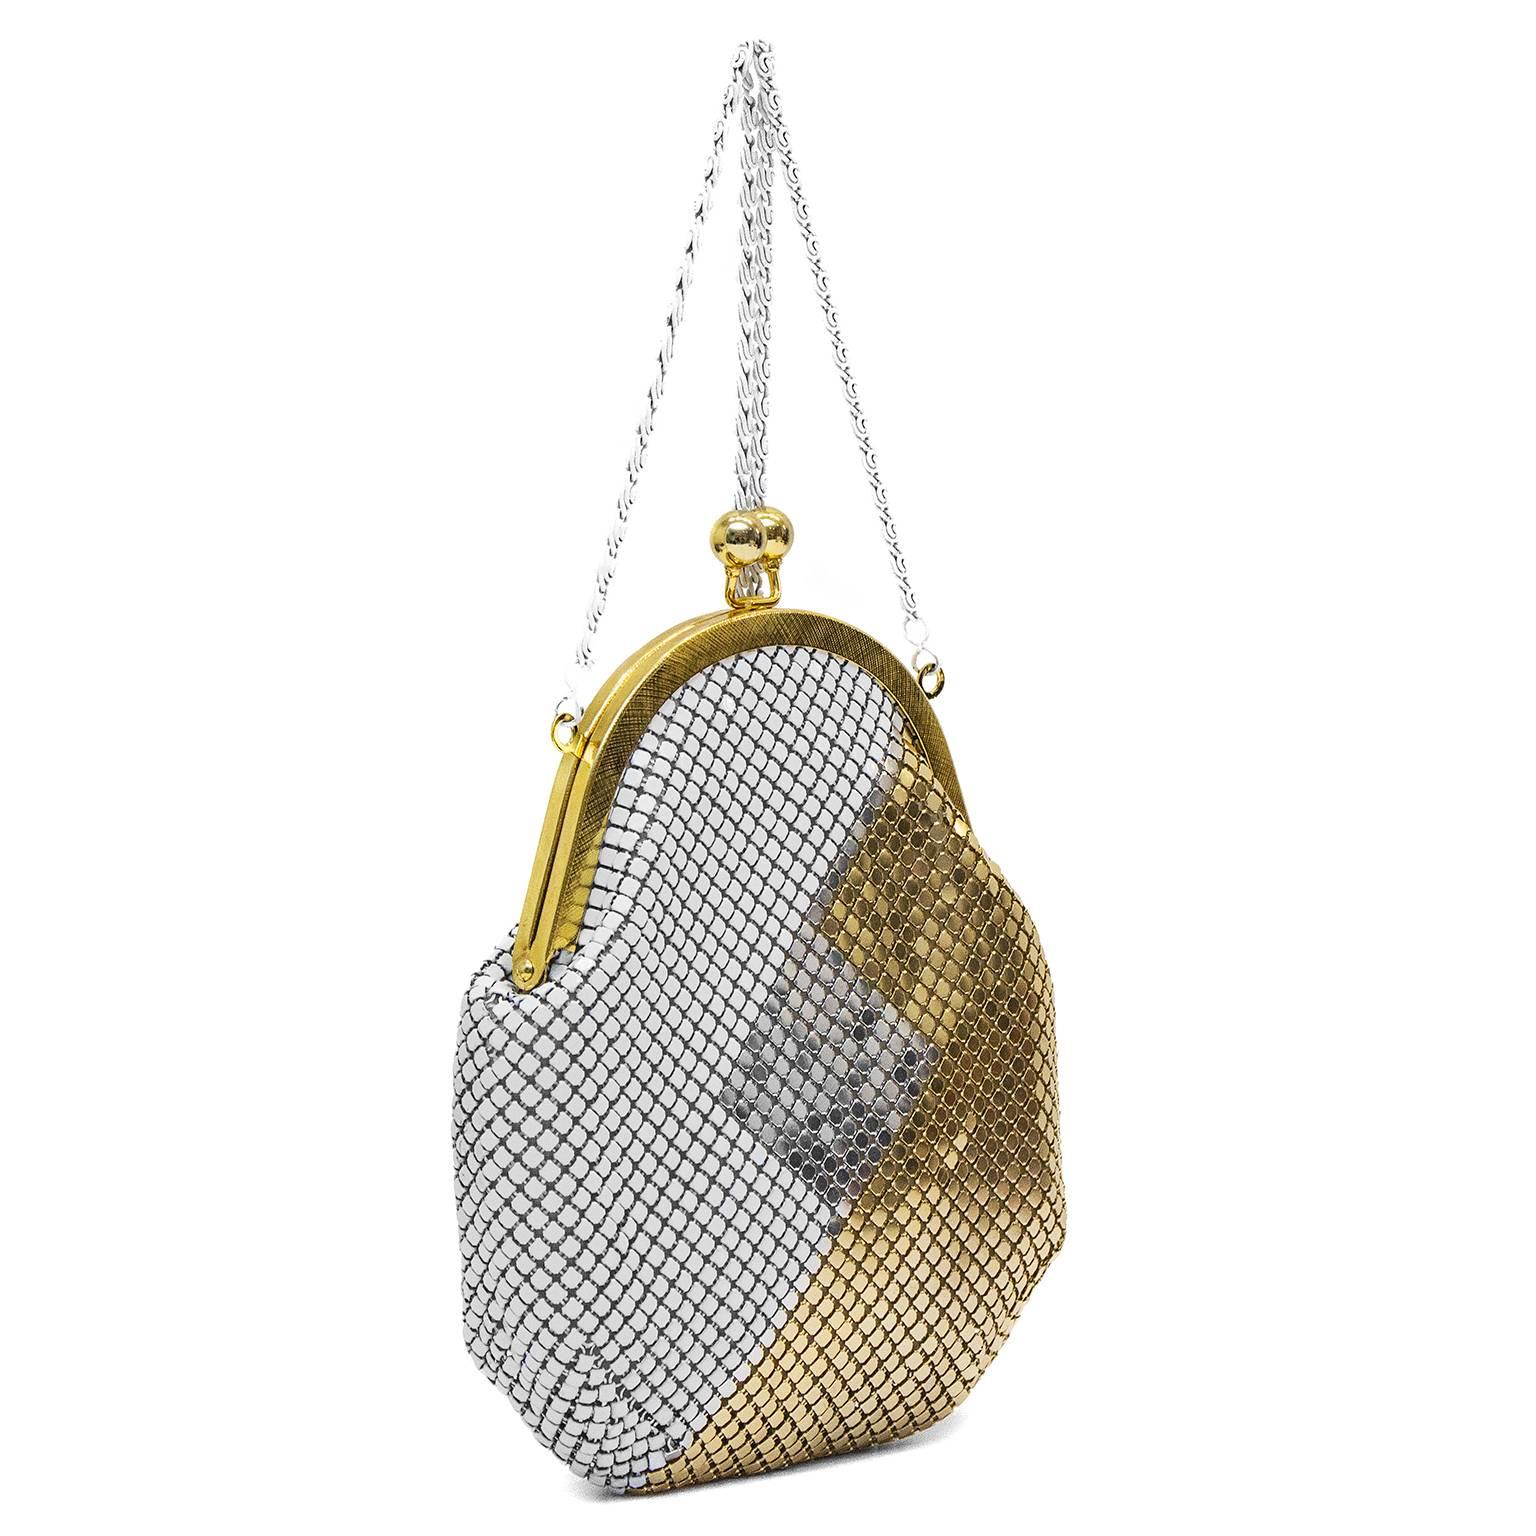 Stunning anonymous 1960's metal mesh evening bag in the style of Whiting and Davis and Paco Rabanne. White, gold and silver geometric pattern, with gold plated hardware, kiss lock and white on metal long chain. Clean fabric interior. Excellent